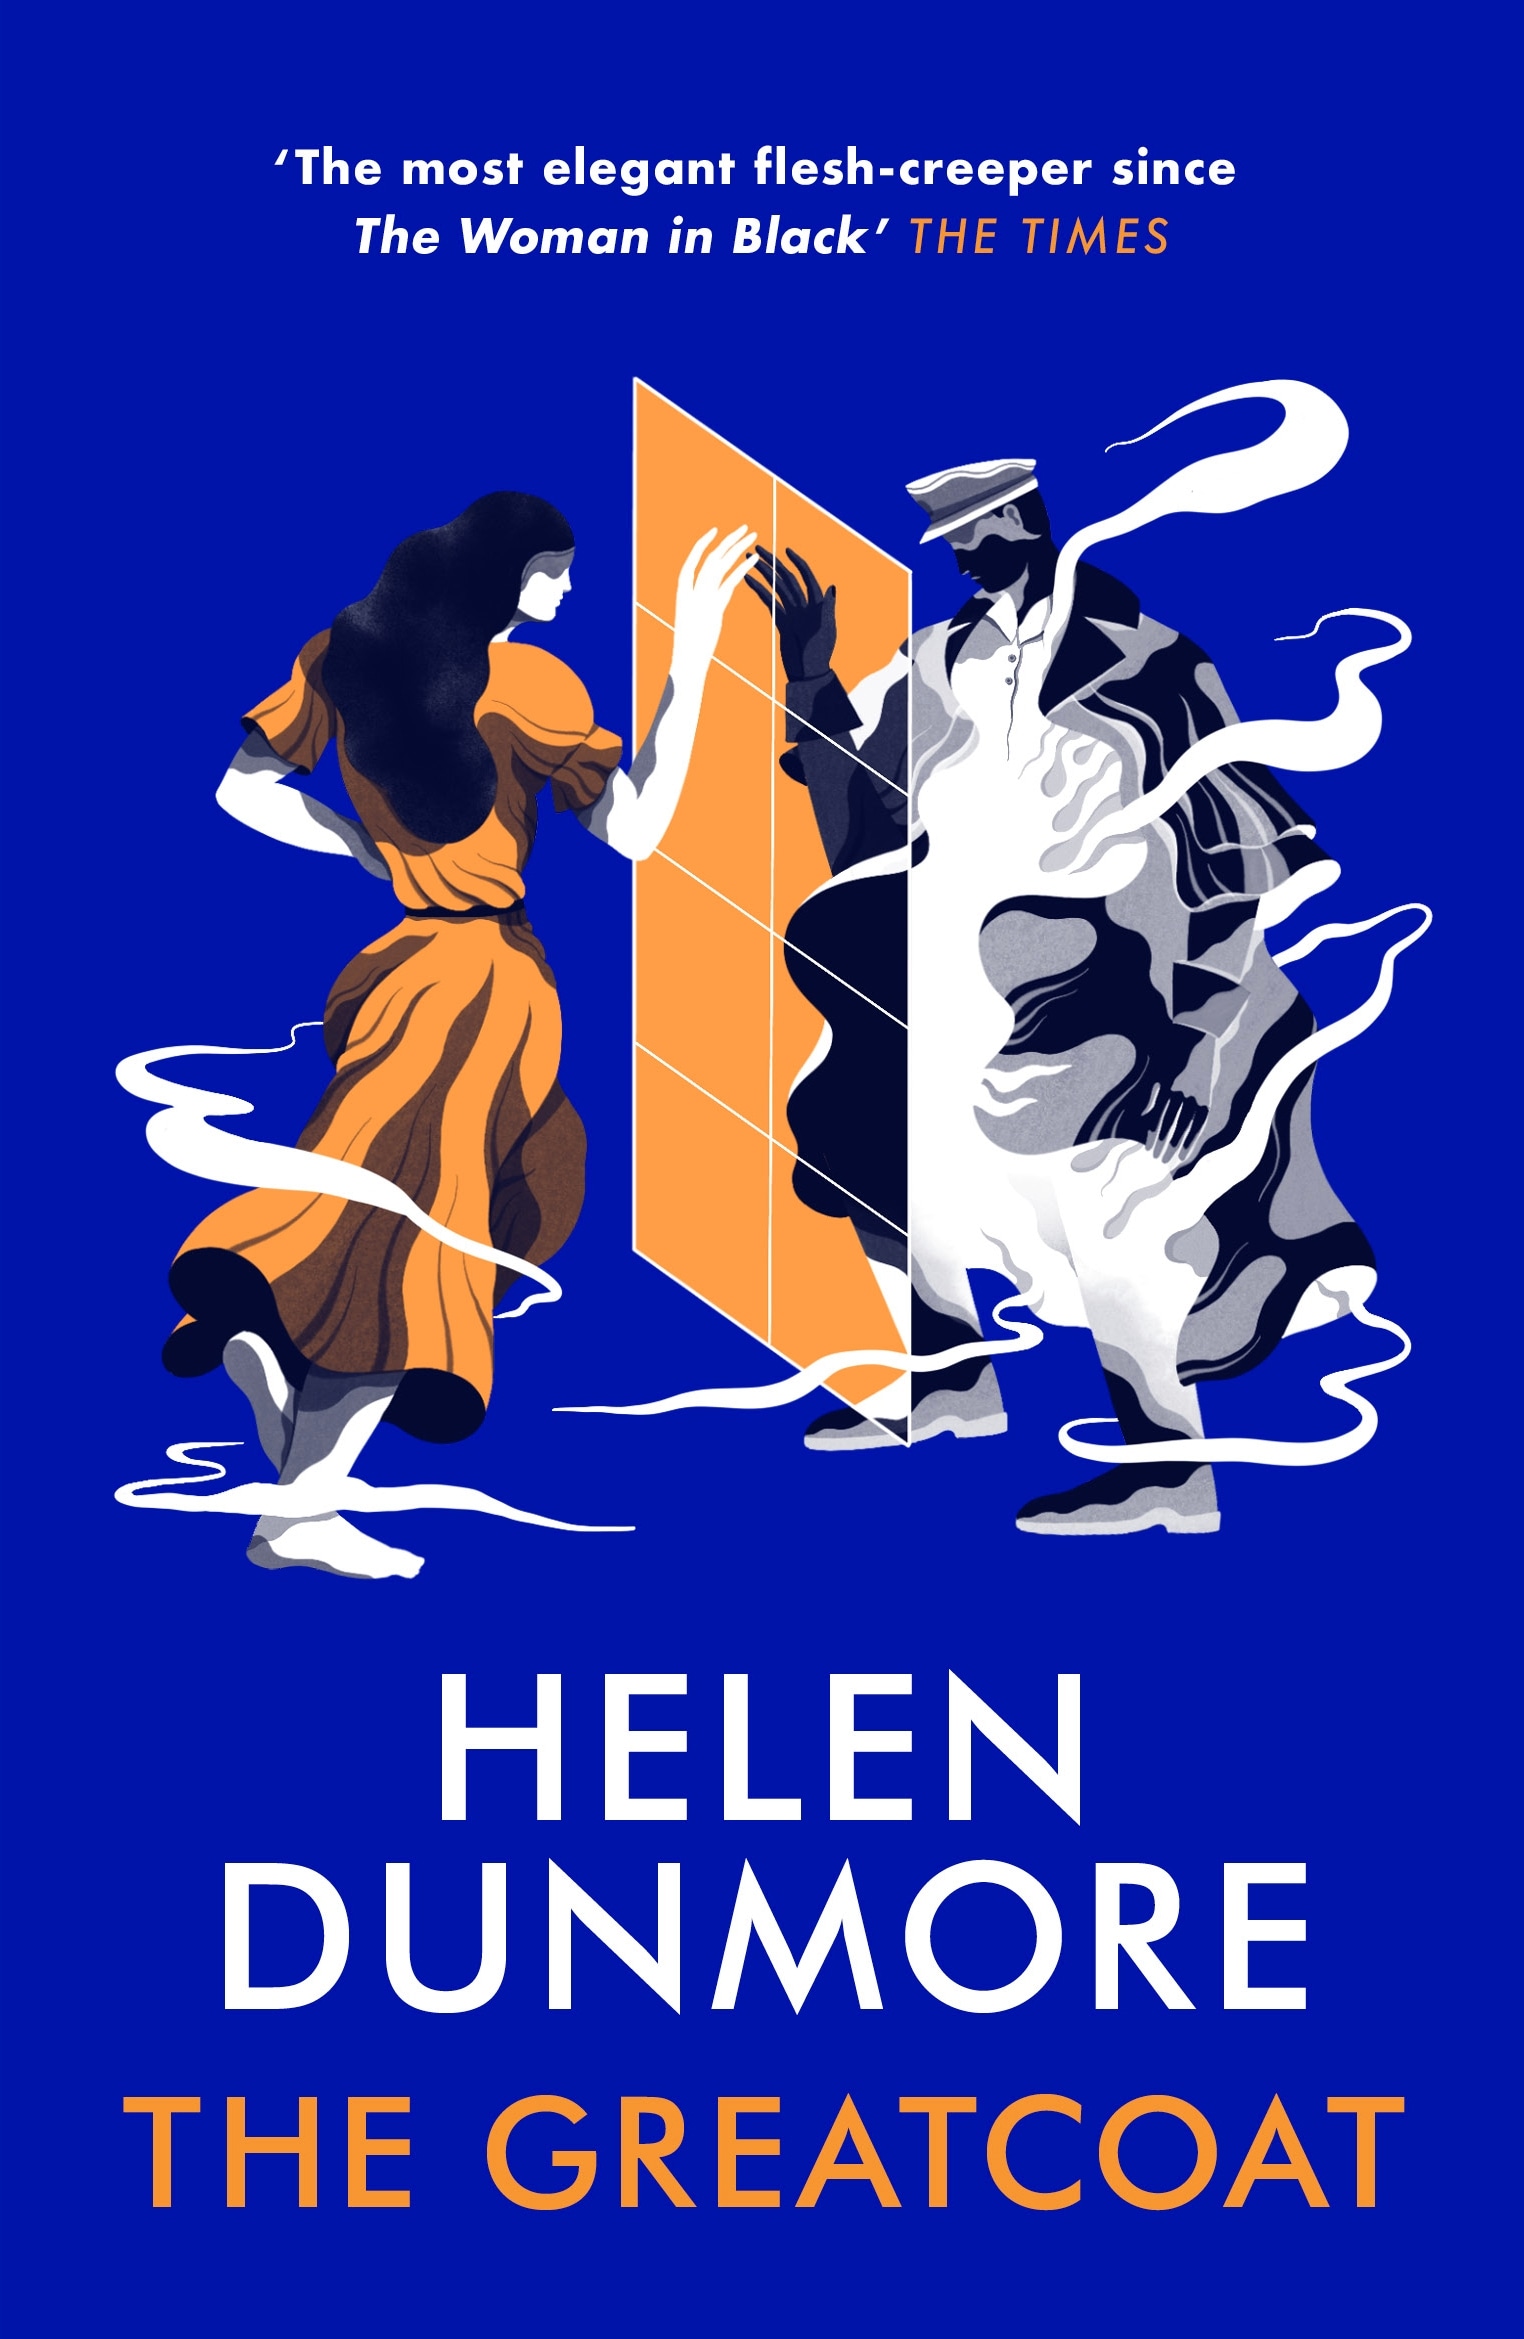 Book “The Greatcoat” by Helen Dunmore — January 14, 2021